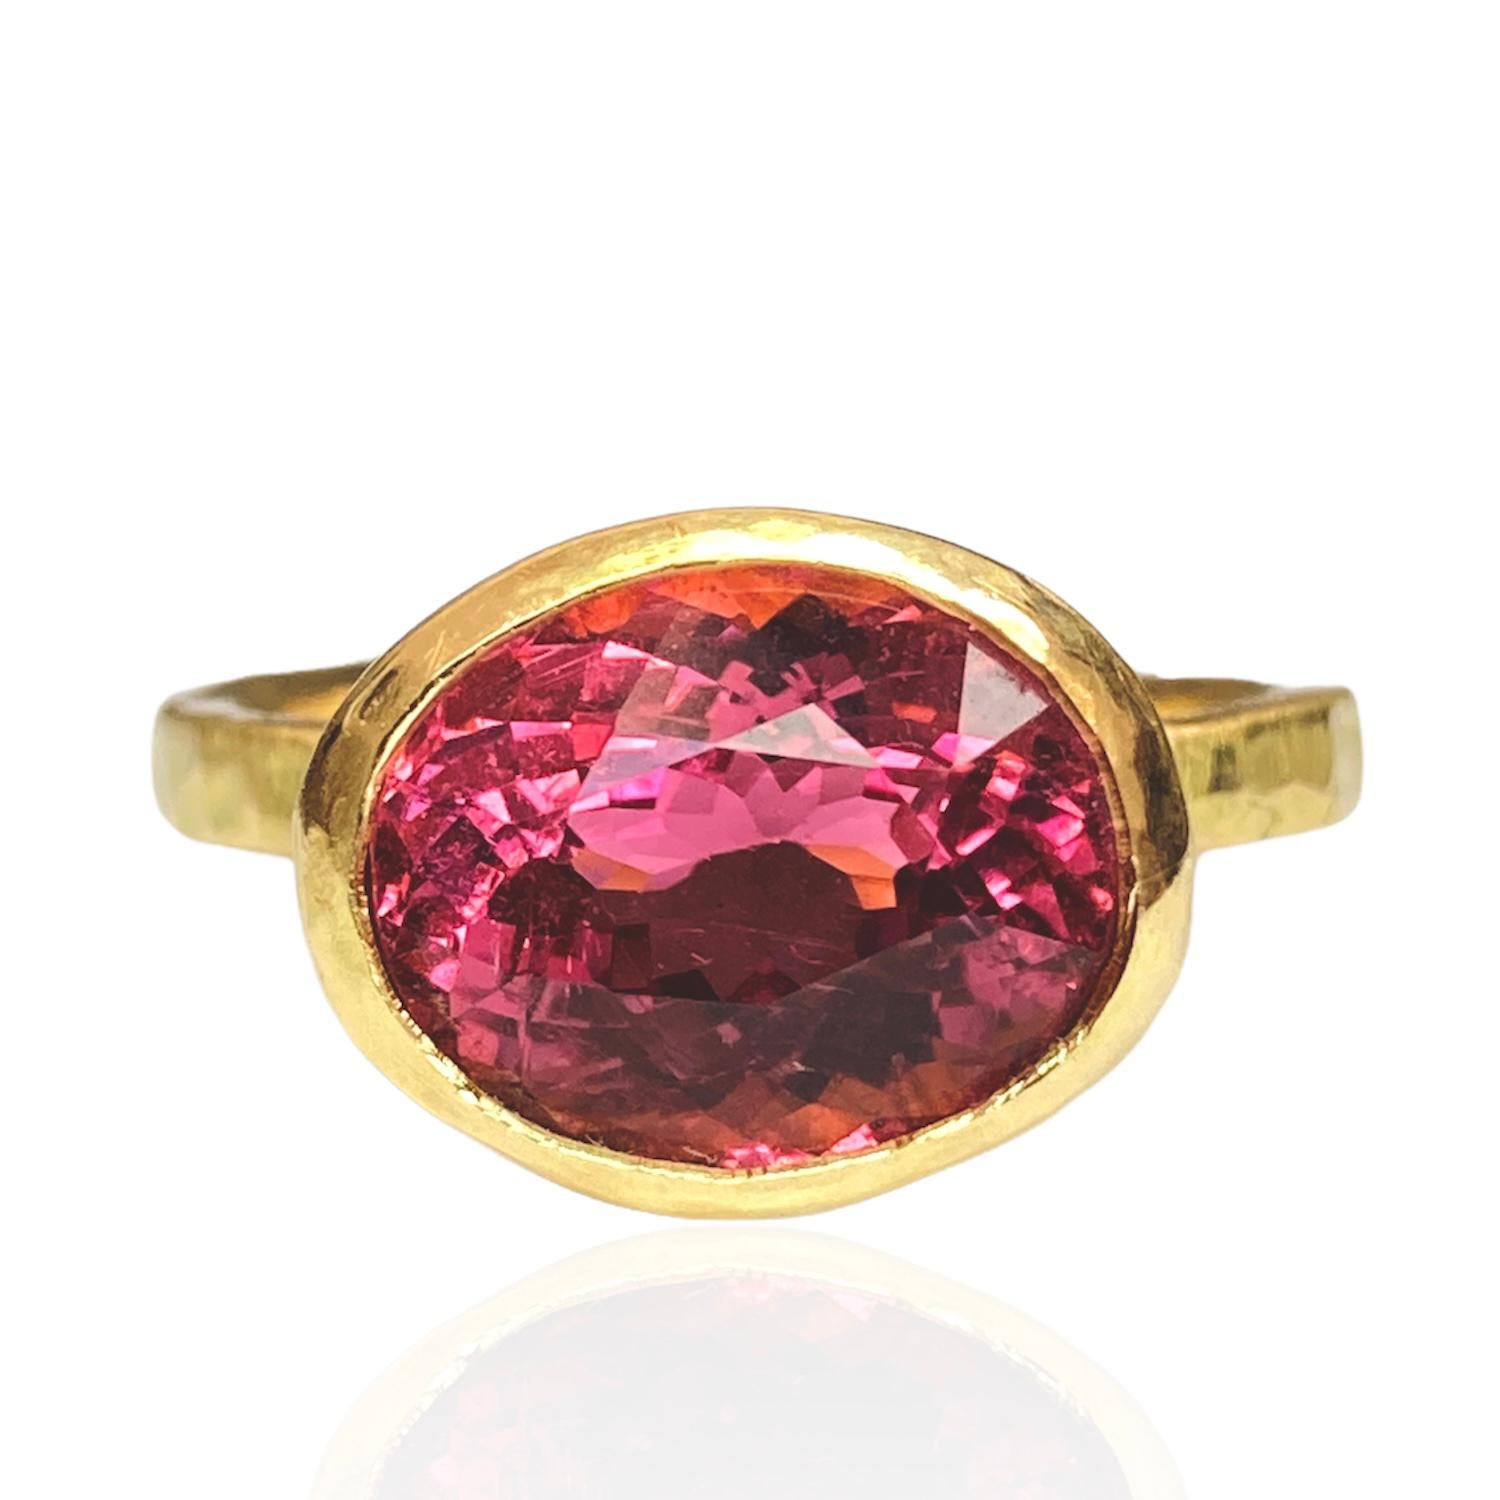 18 Karat Yellow Gold Ring by Deborah Murdoch is from the Abundance Collection featuring an oval 3.76ct Natural African Hot Pink Tourmaline Stone. The ring band is slightly planished giving that textural feel and has a silky satin finish. 

Metal: 18